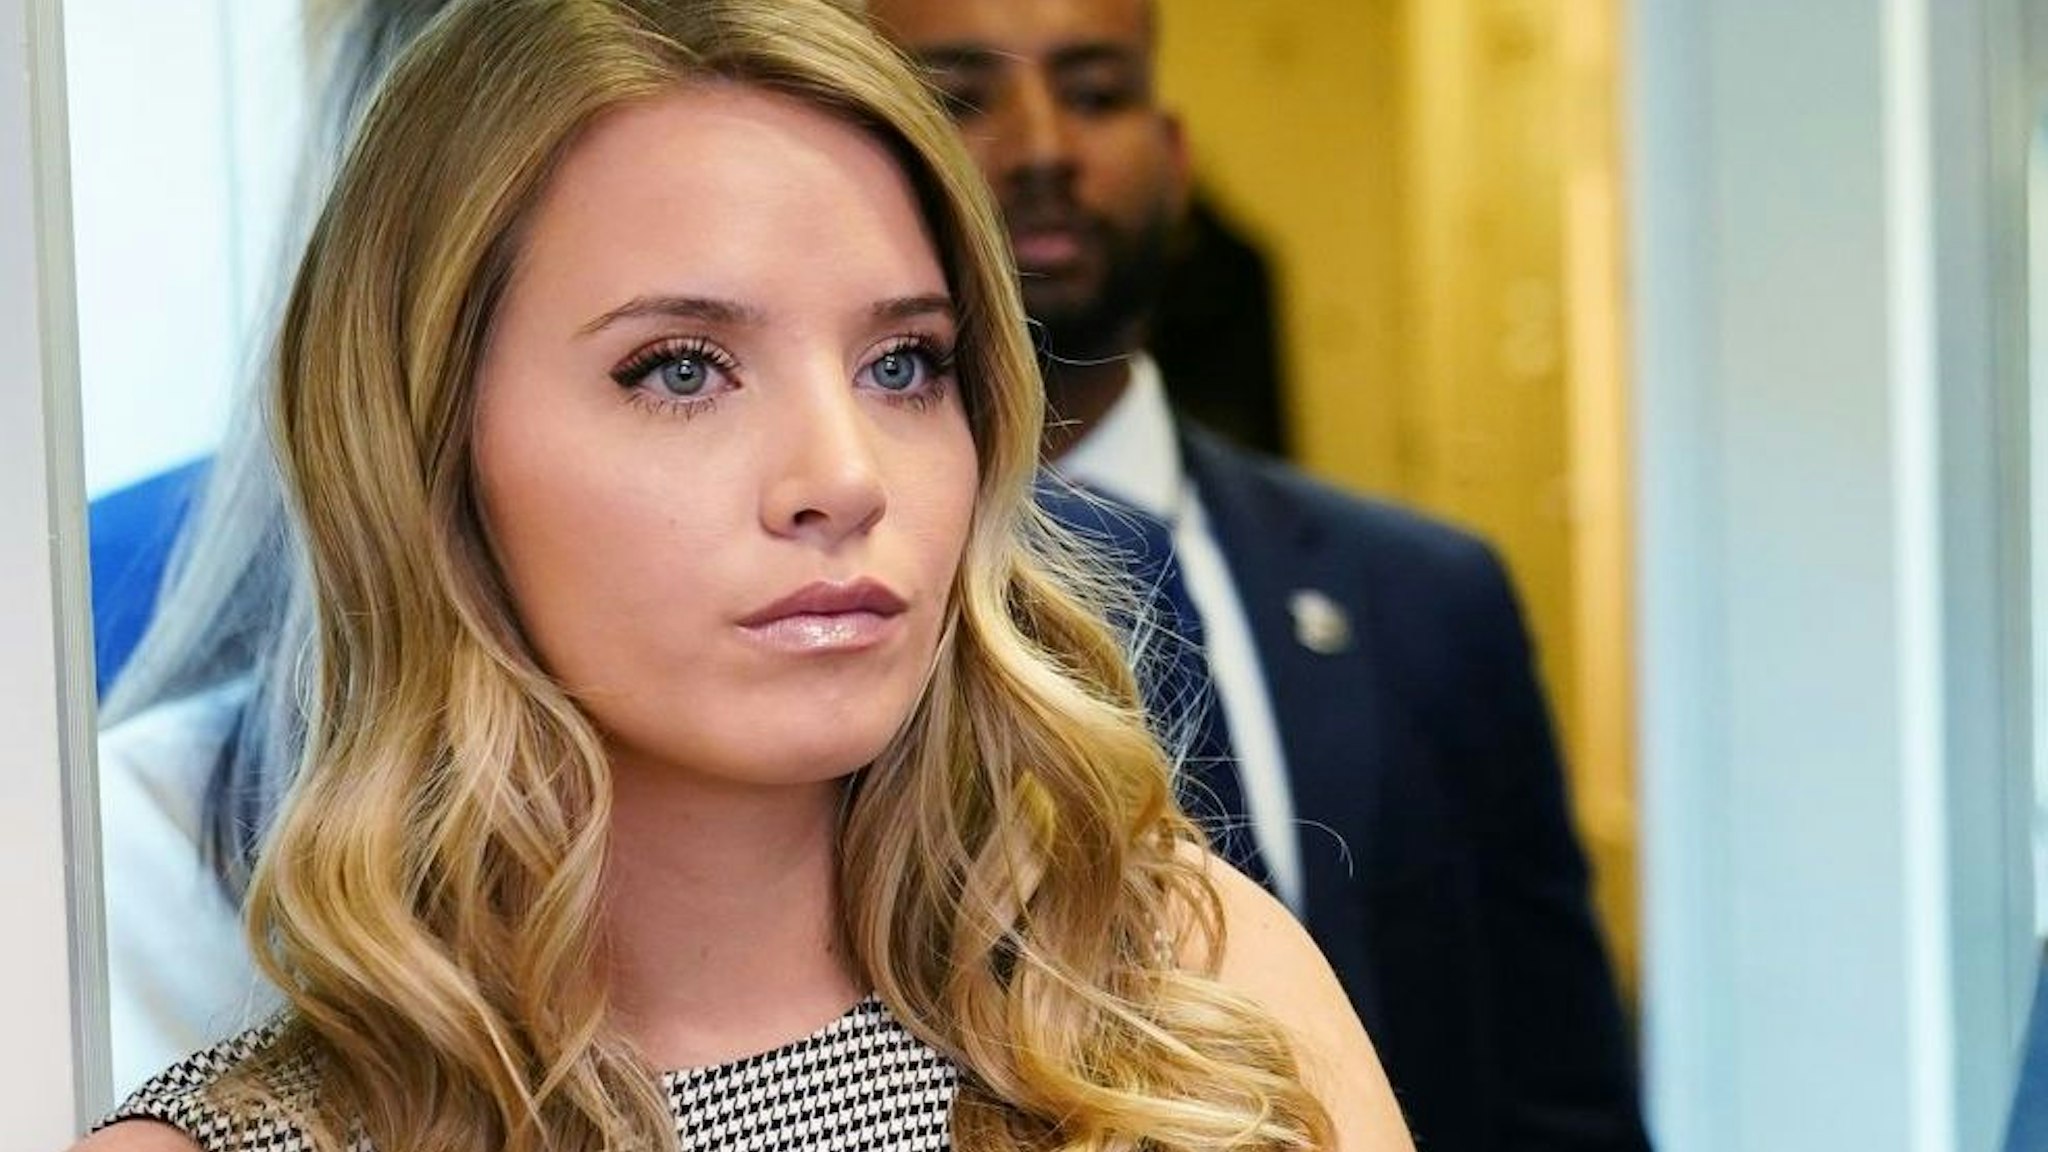 Ryann McEnany, the sister of White House Press Secretary Kayleigh McEnany, watches as her sister speaks during a briefing in the Brady Briefing Room of the White House in Washington, DC on November 20, 2020.